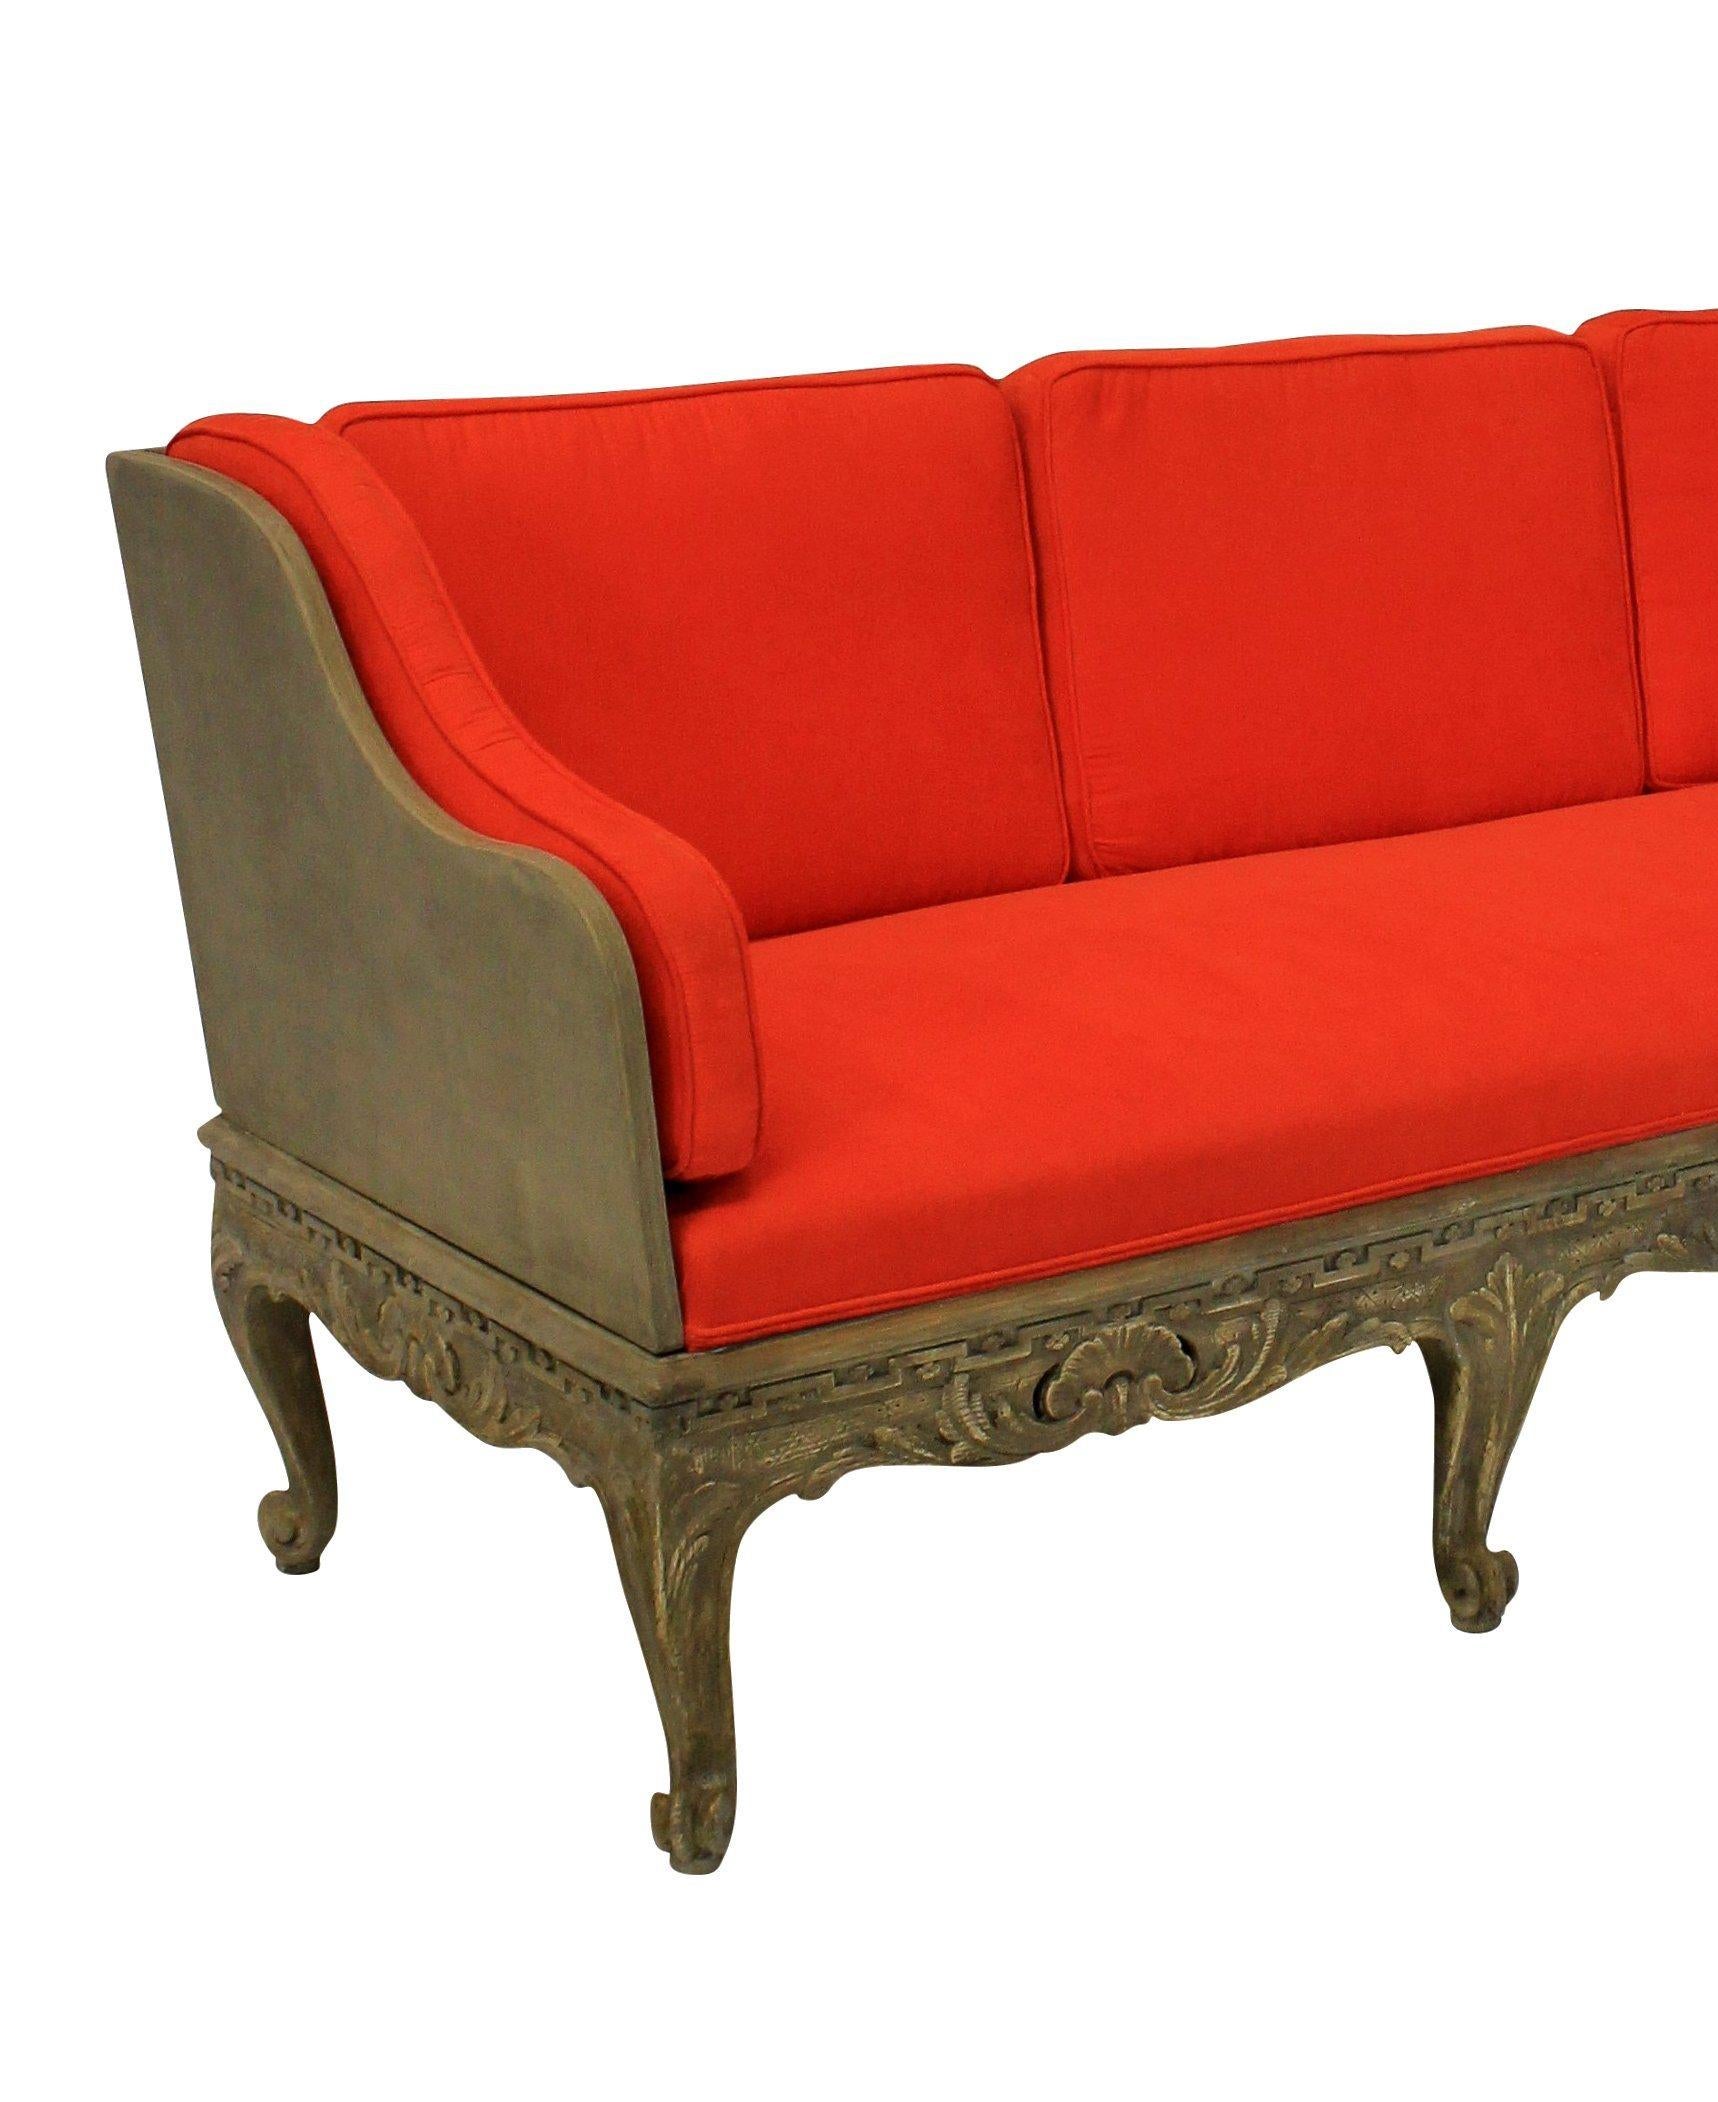 Early 20th Century Large Swedish Carved and Painted Daybed or Settee with Removable Back